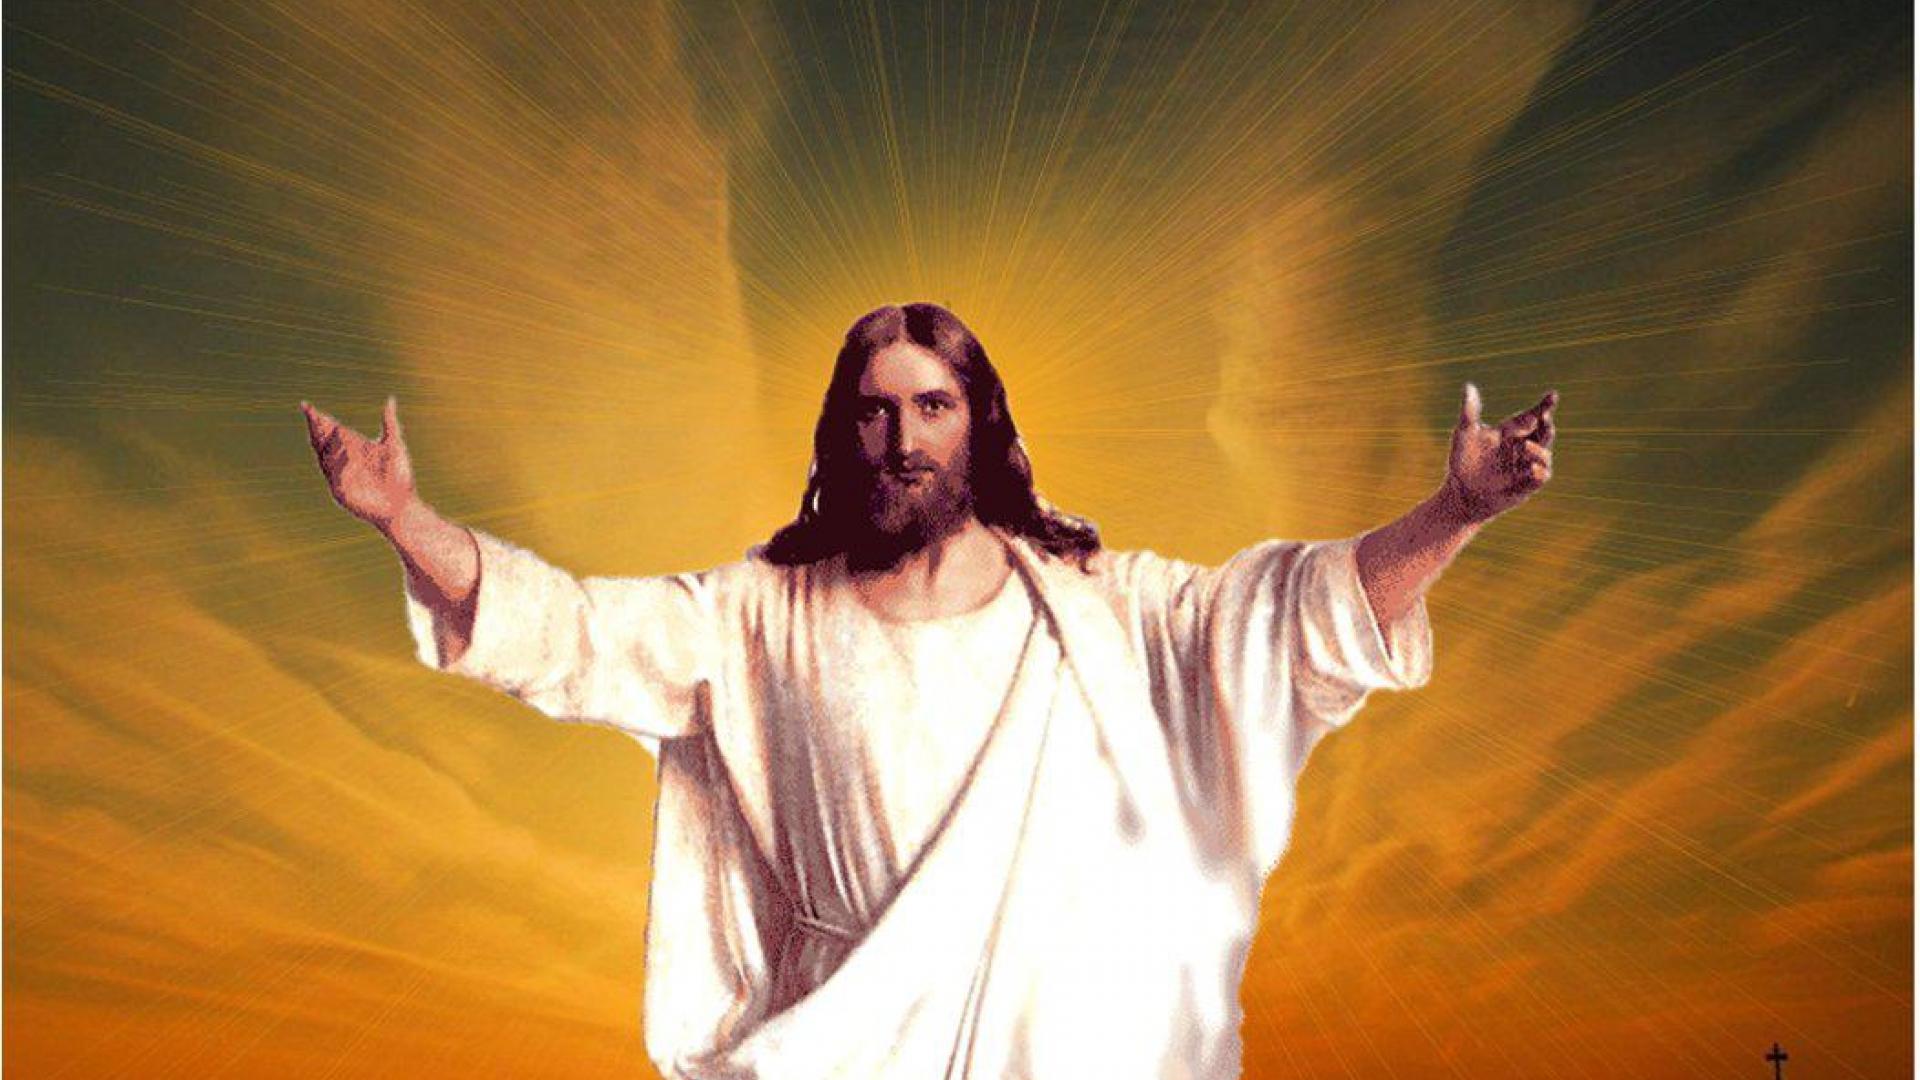 Jesus Christ High Quality And Resolution Wallpaper On